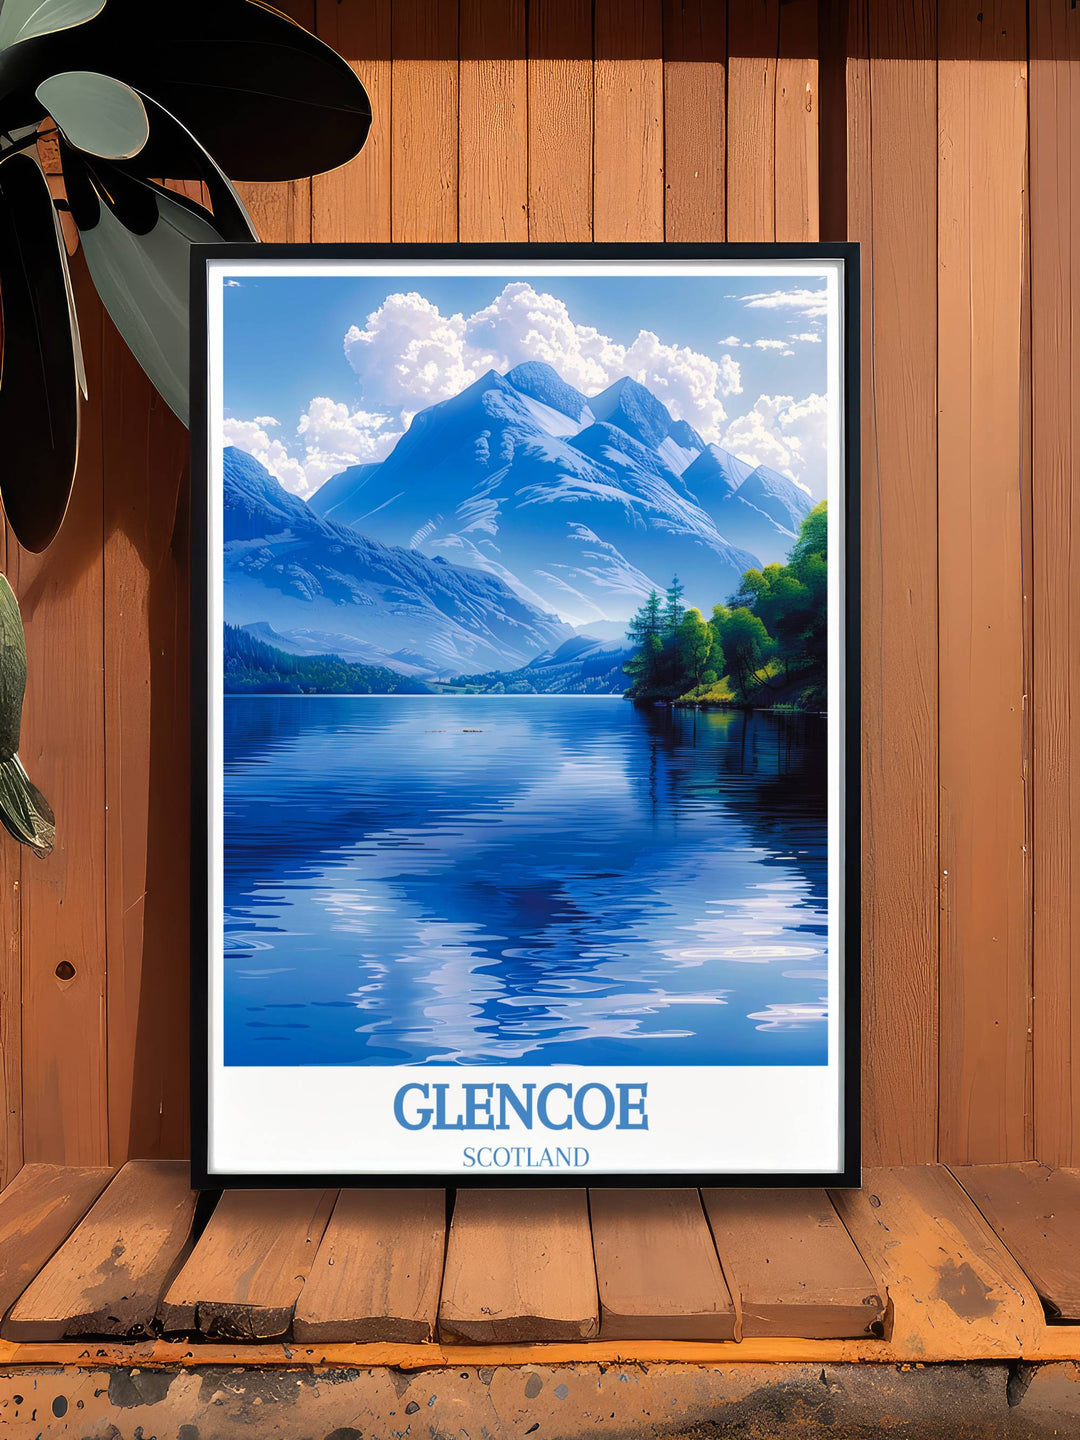 This Glencoe artwork, a centerpiece among Europe Gifts, weaves the serene beauty of Scottish highlands into a tapestry of natural wonder and history.